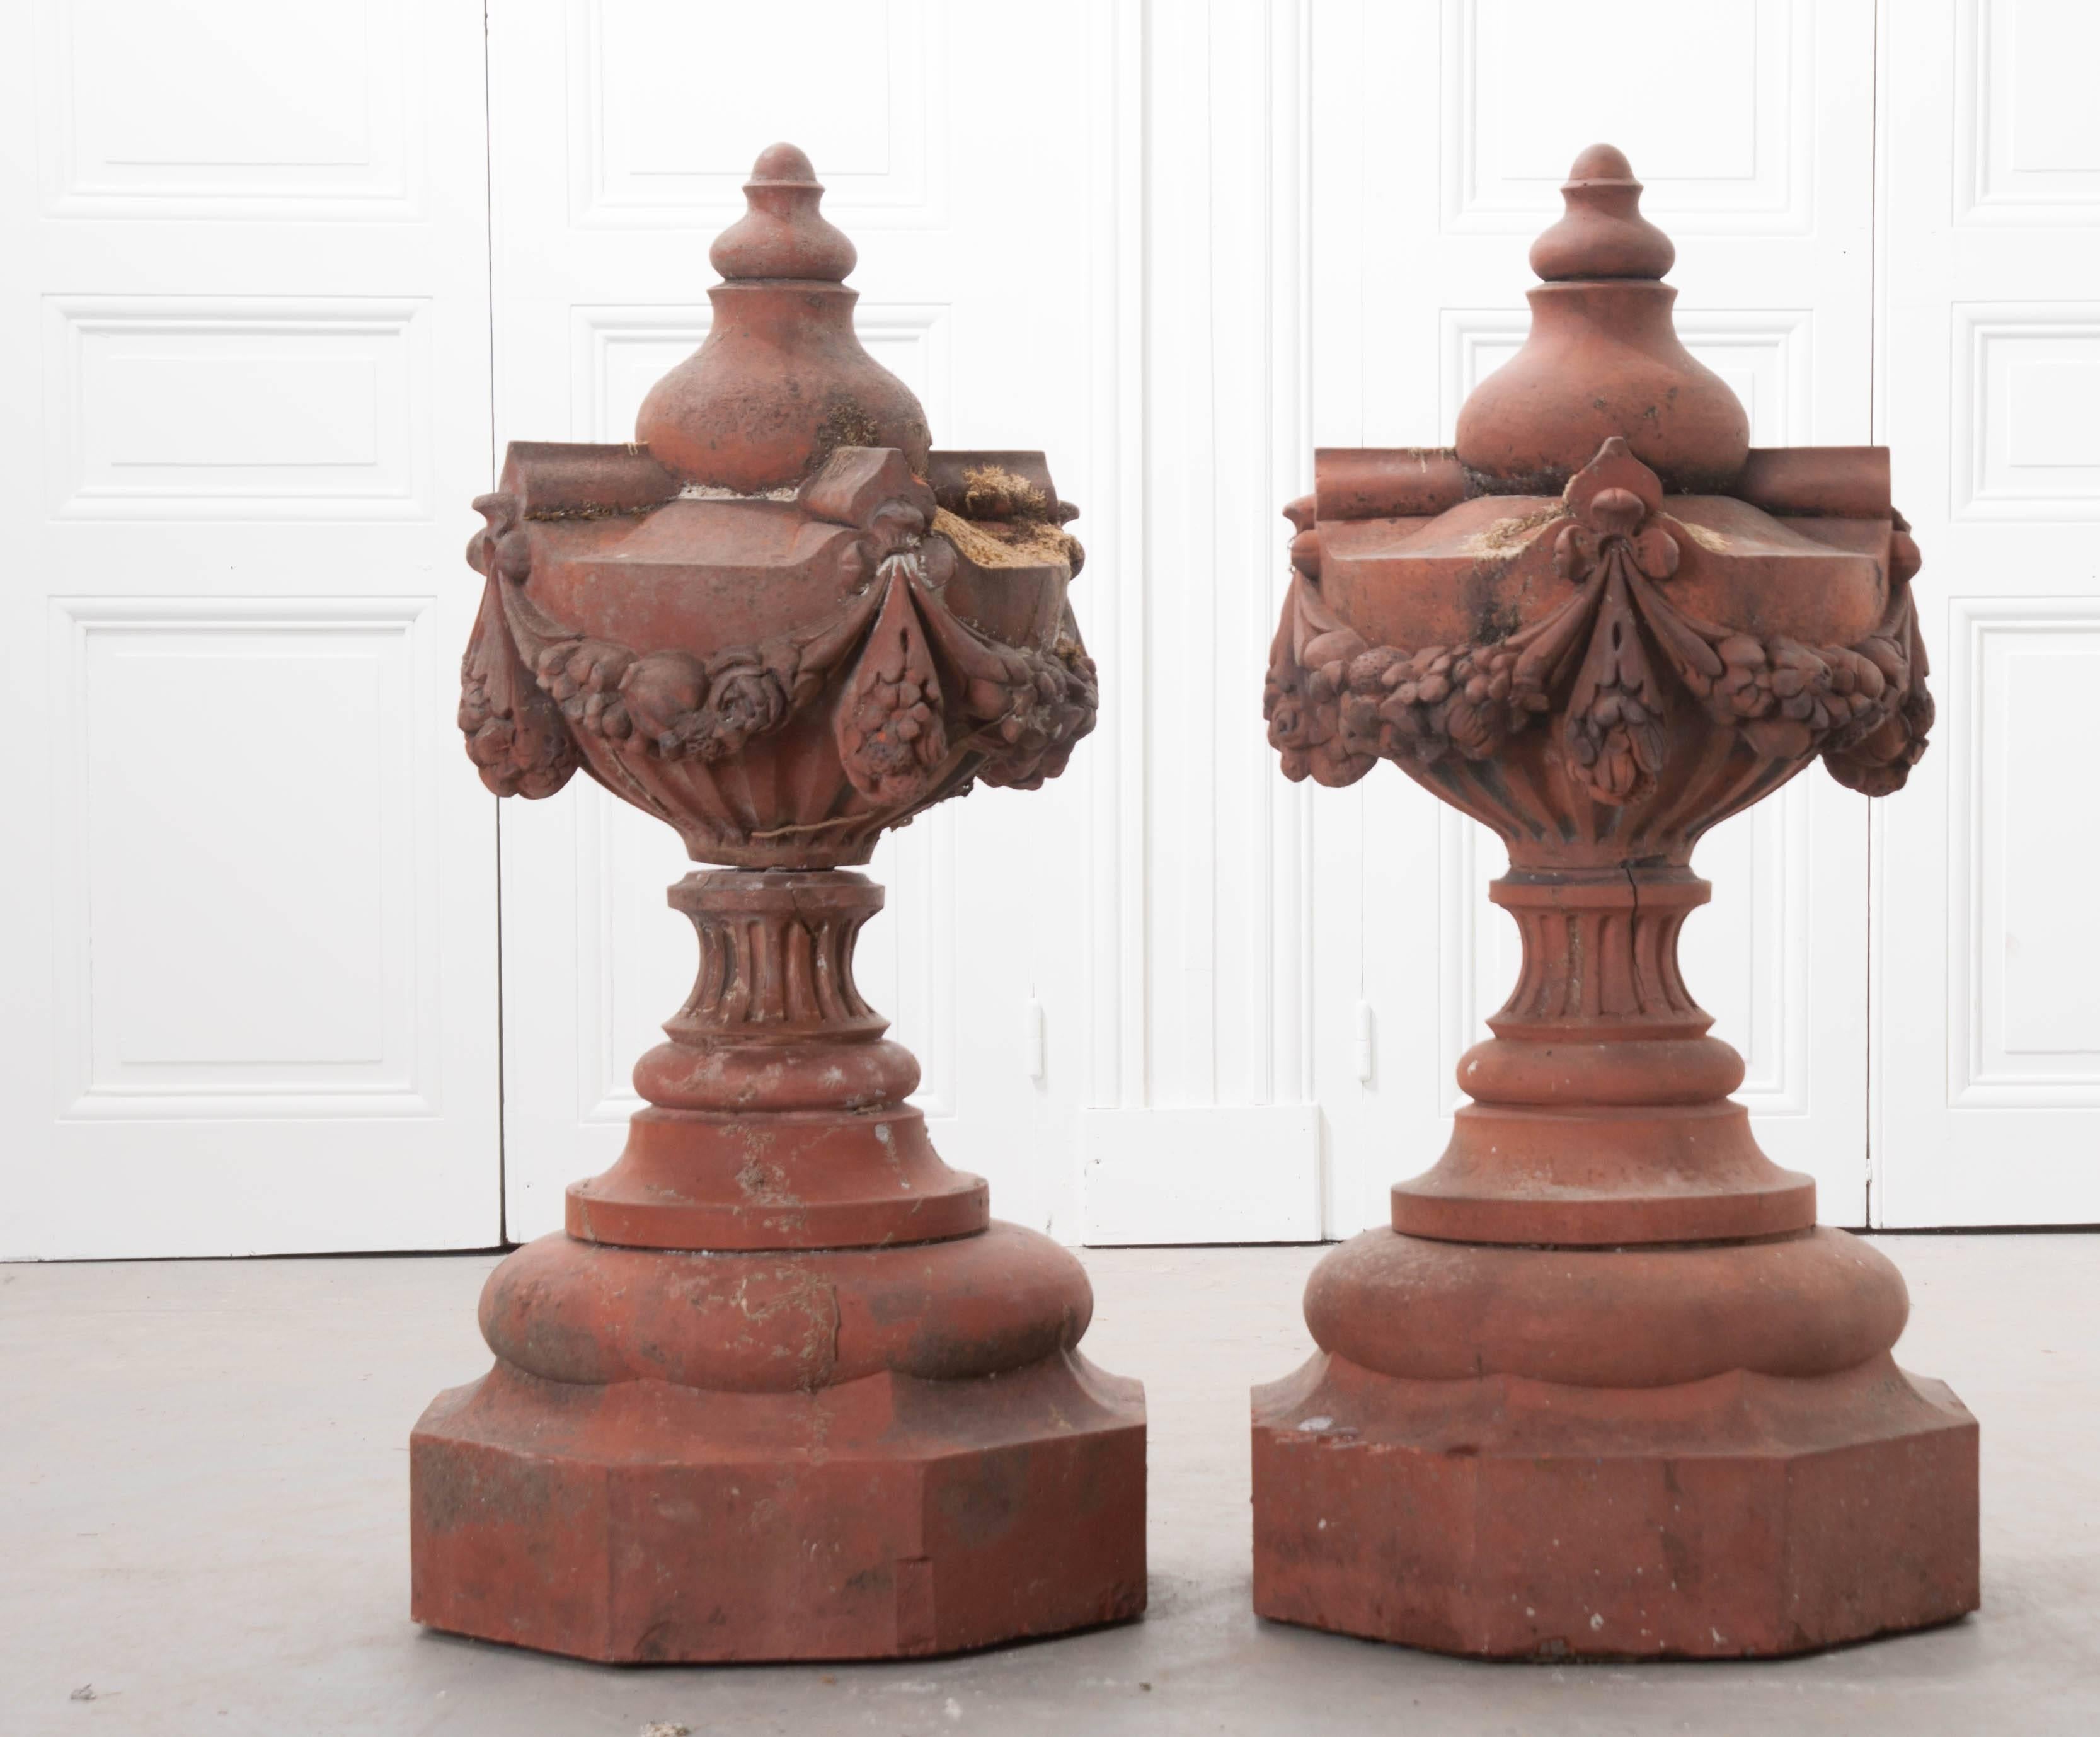 A stunning pair of antique terra cotta finials from 19th century, France. These beautiful fixtures have a superb brick color that has been aged from decades of exposure to the elements. This exposure has resulted in a fabulous patina that is second